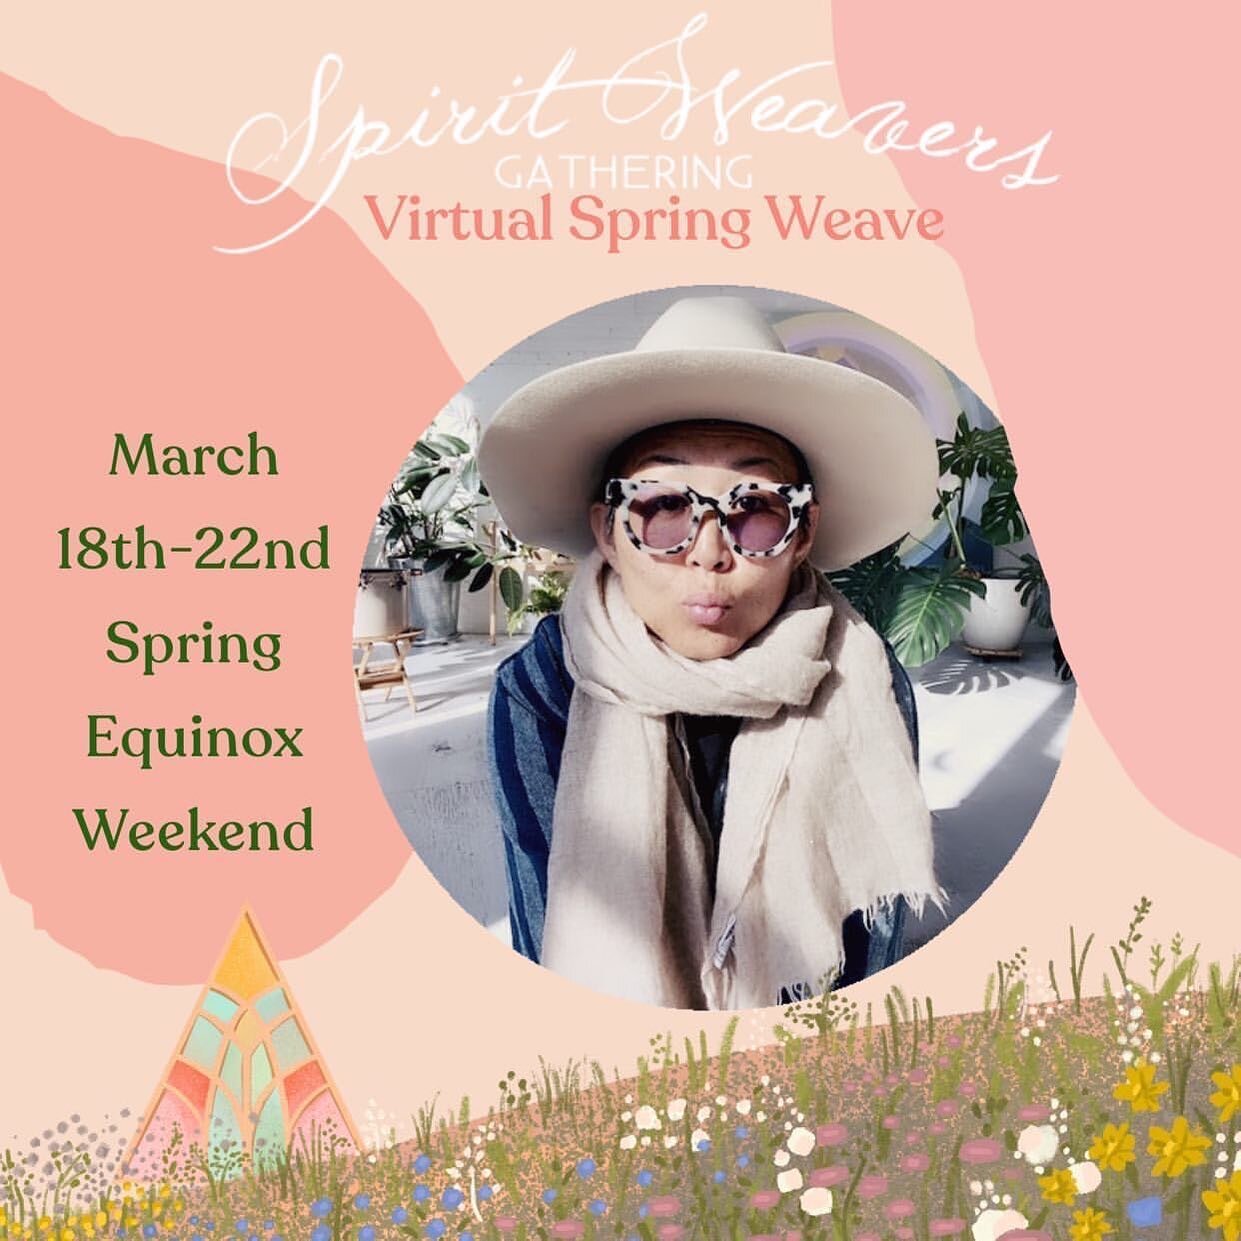 I am also teaching tomorrow alongside powerful womxn - I am focusing on ancestral healing in OUR BODY &amp; MIND, without escaping the complexities of this reality.  Hope y&rsquo;all join in via @spiritweavers virtual weave🌈
*

This class offers sim